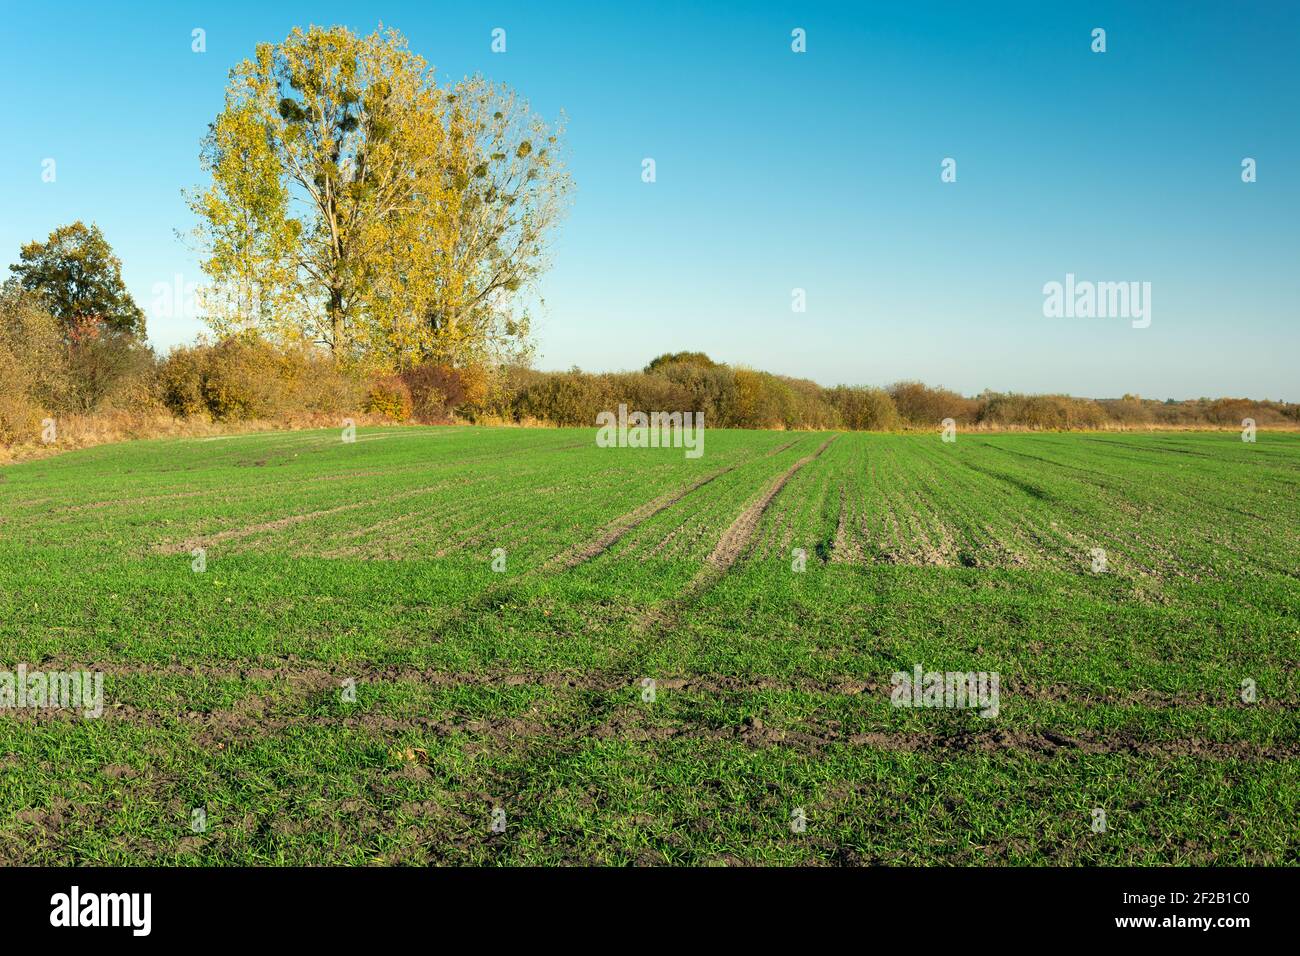 Green field and tree with yellow leaves, blue cloudless sky Stock Photo